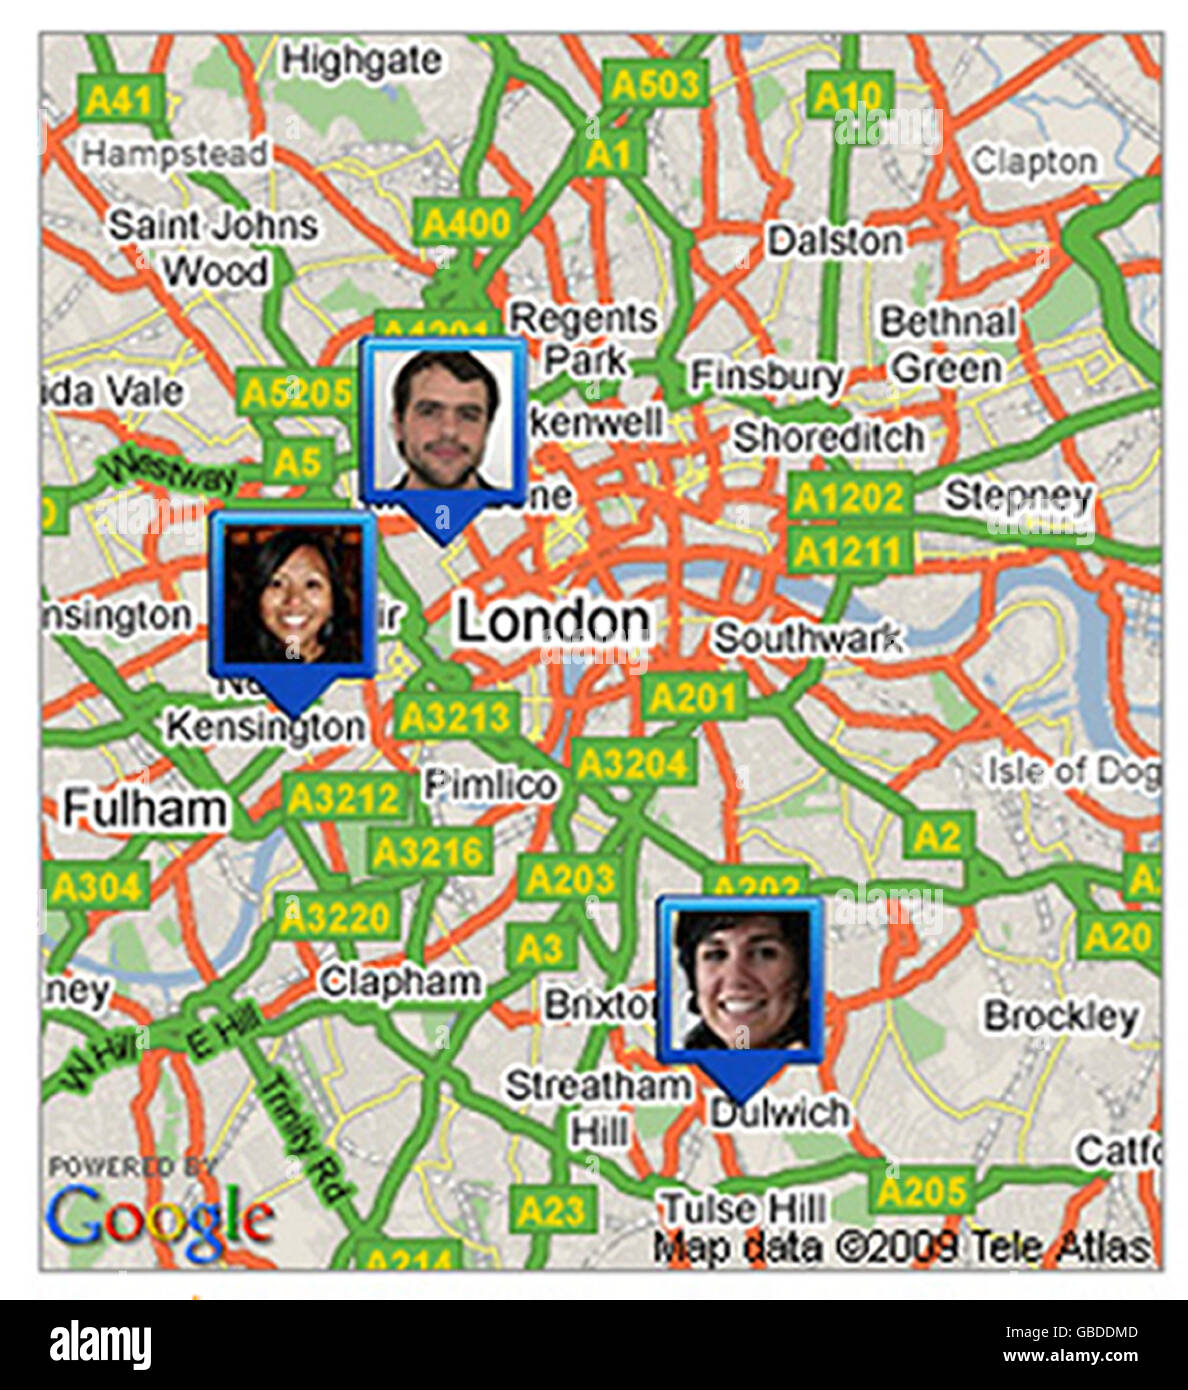 Screengrab of the Google Latitude website showing a map of London with the various locations of Latitude users. Stock Photo